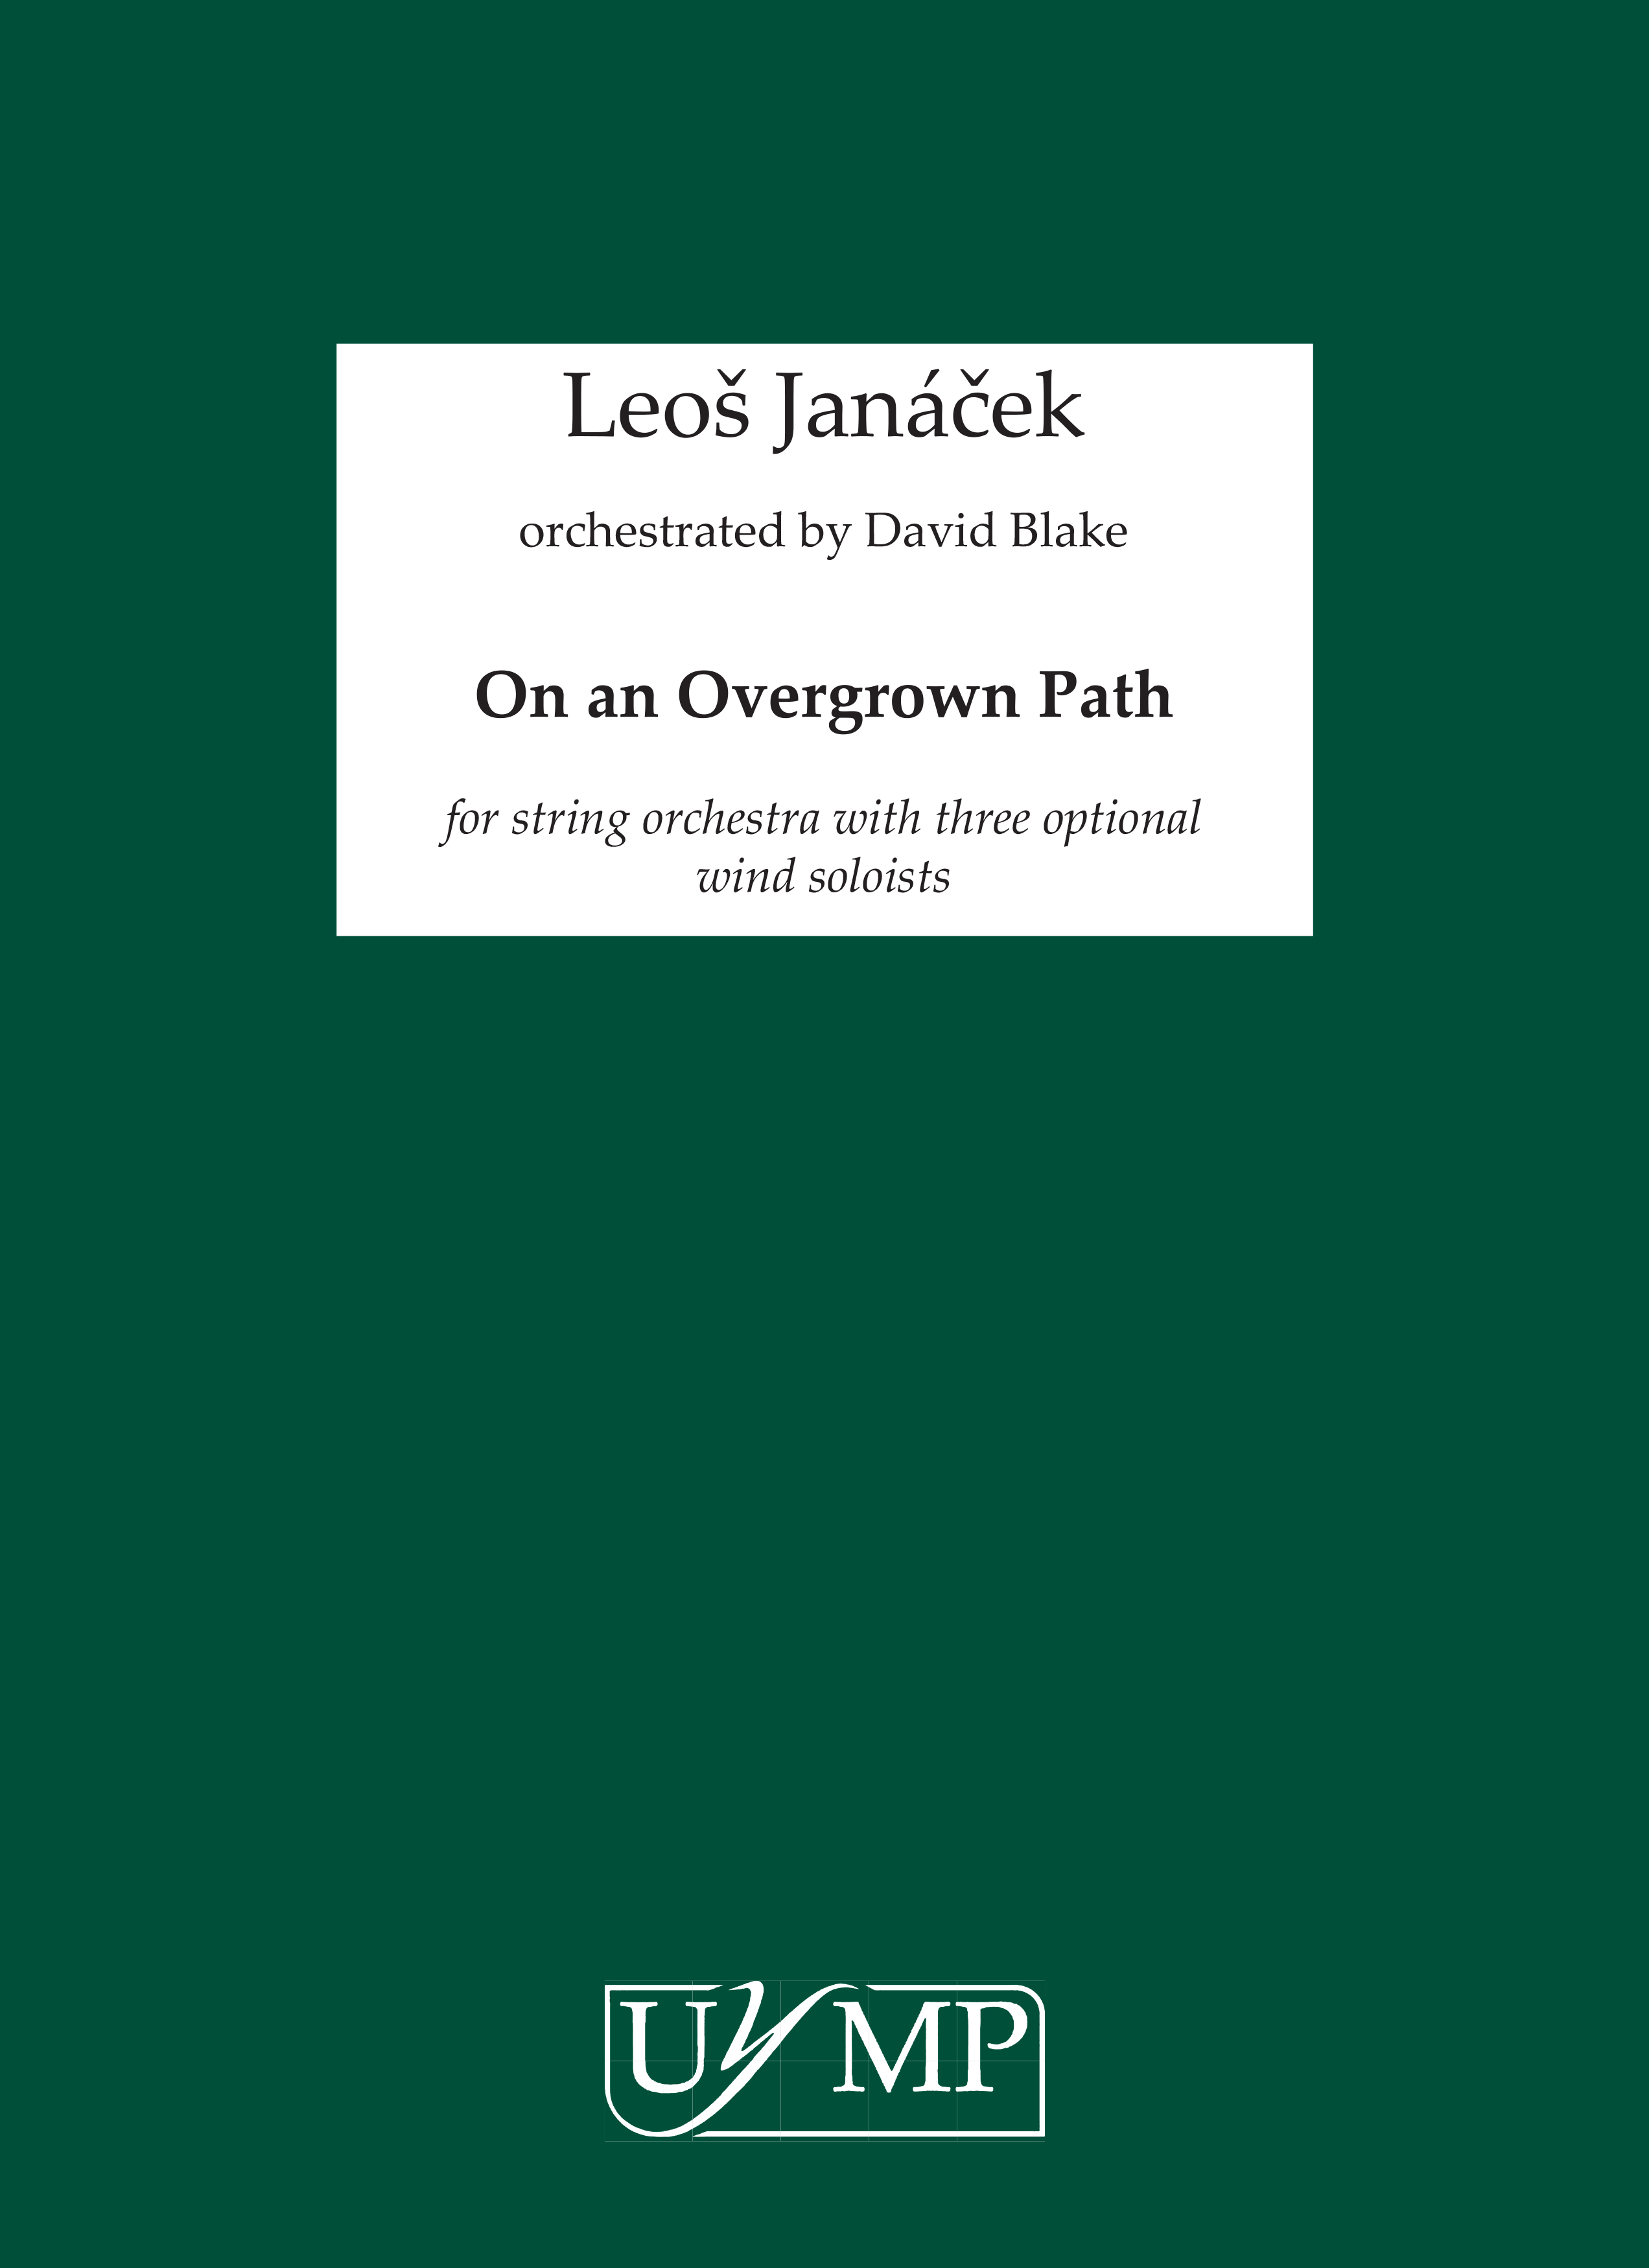 Leos Jancek: On An Overgrown Path - String Orchestra